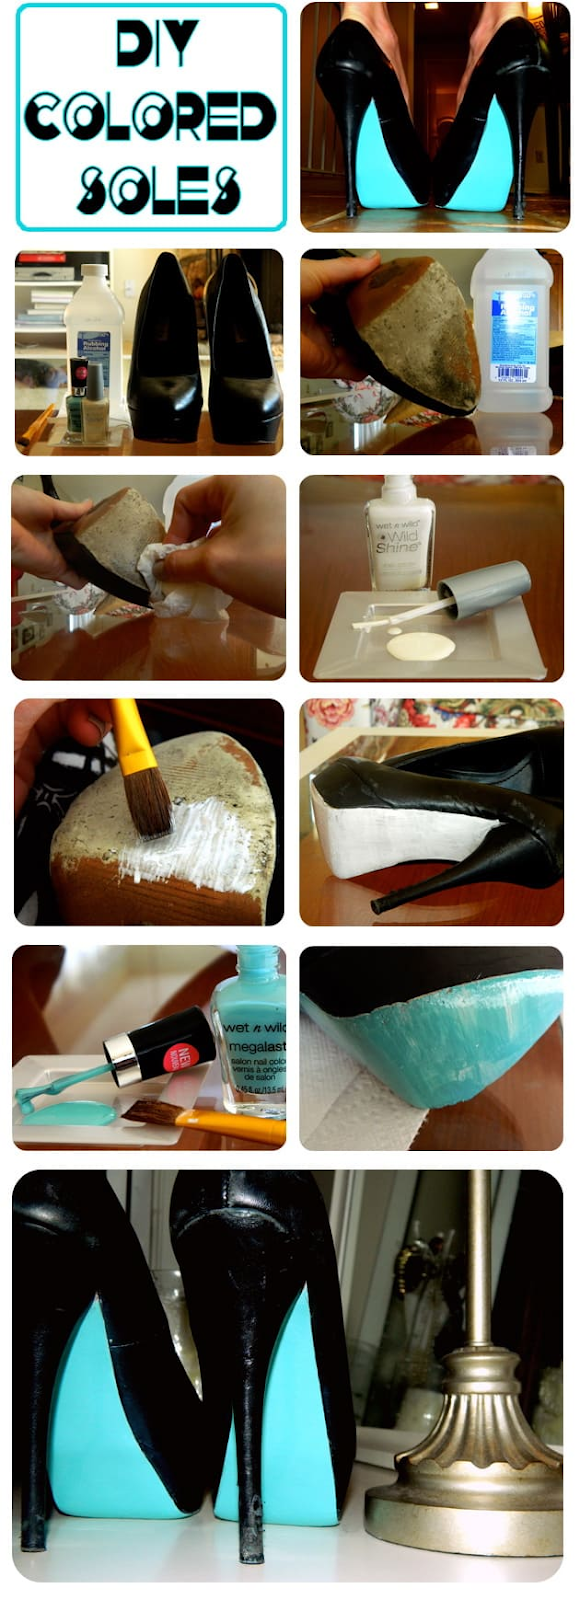 Easy And Clever DIY Projects: Colored Soles 